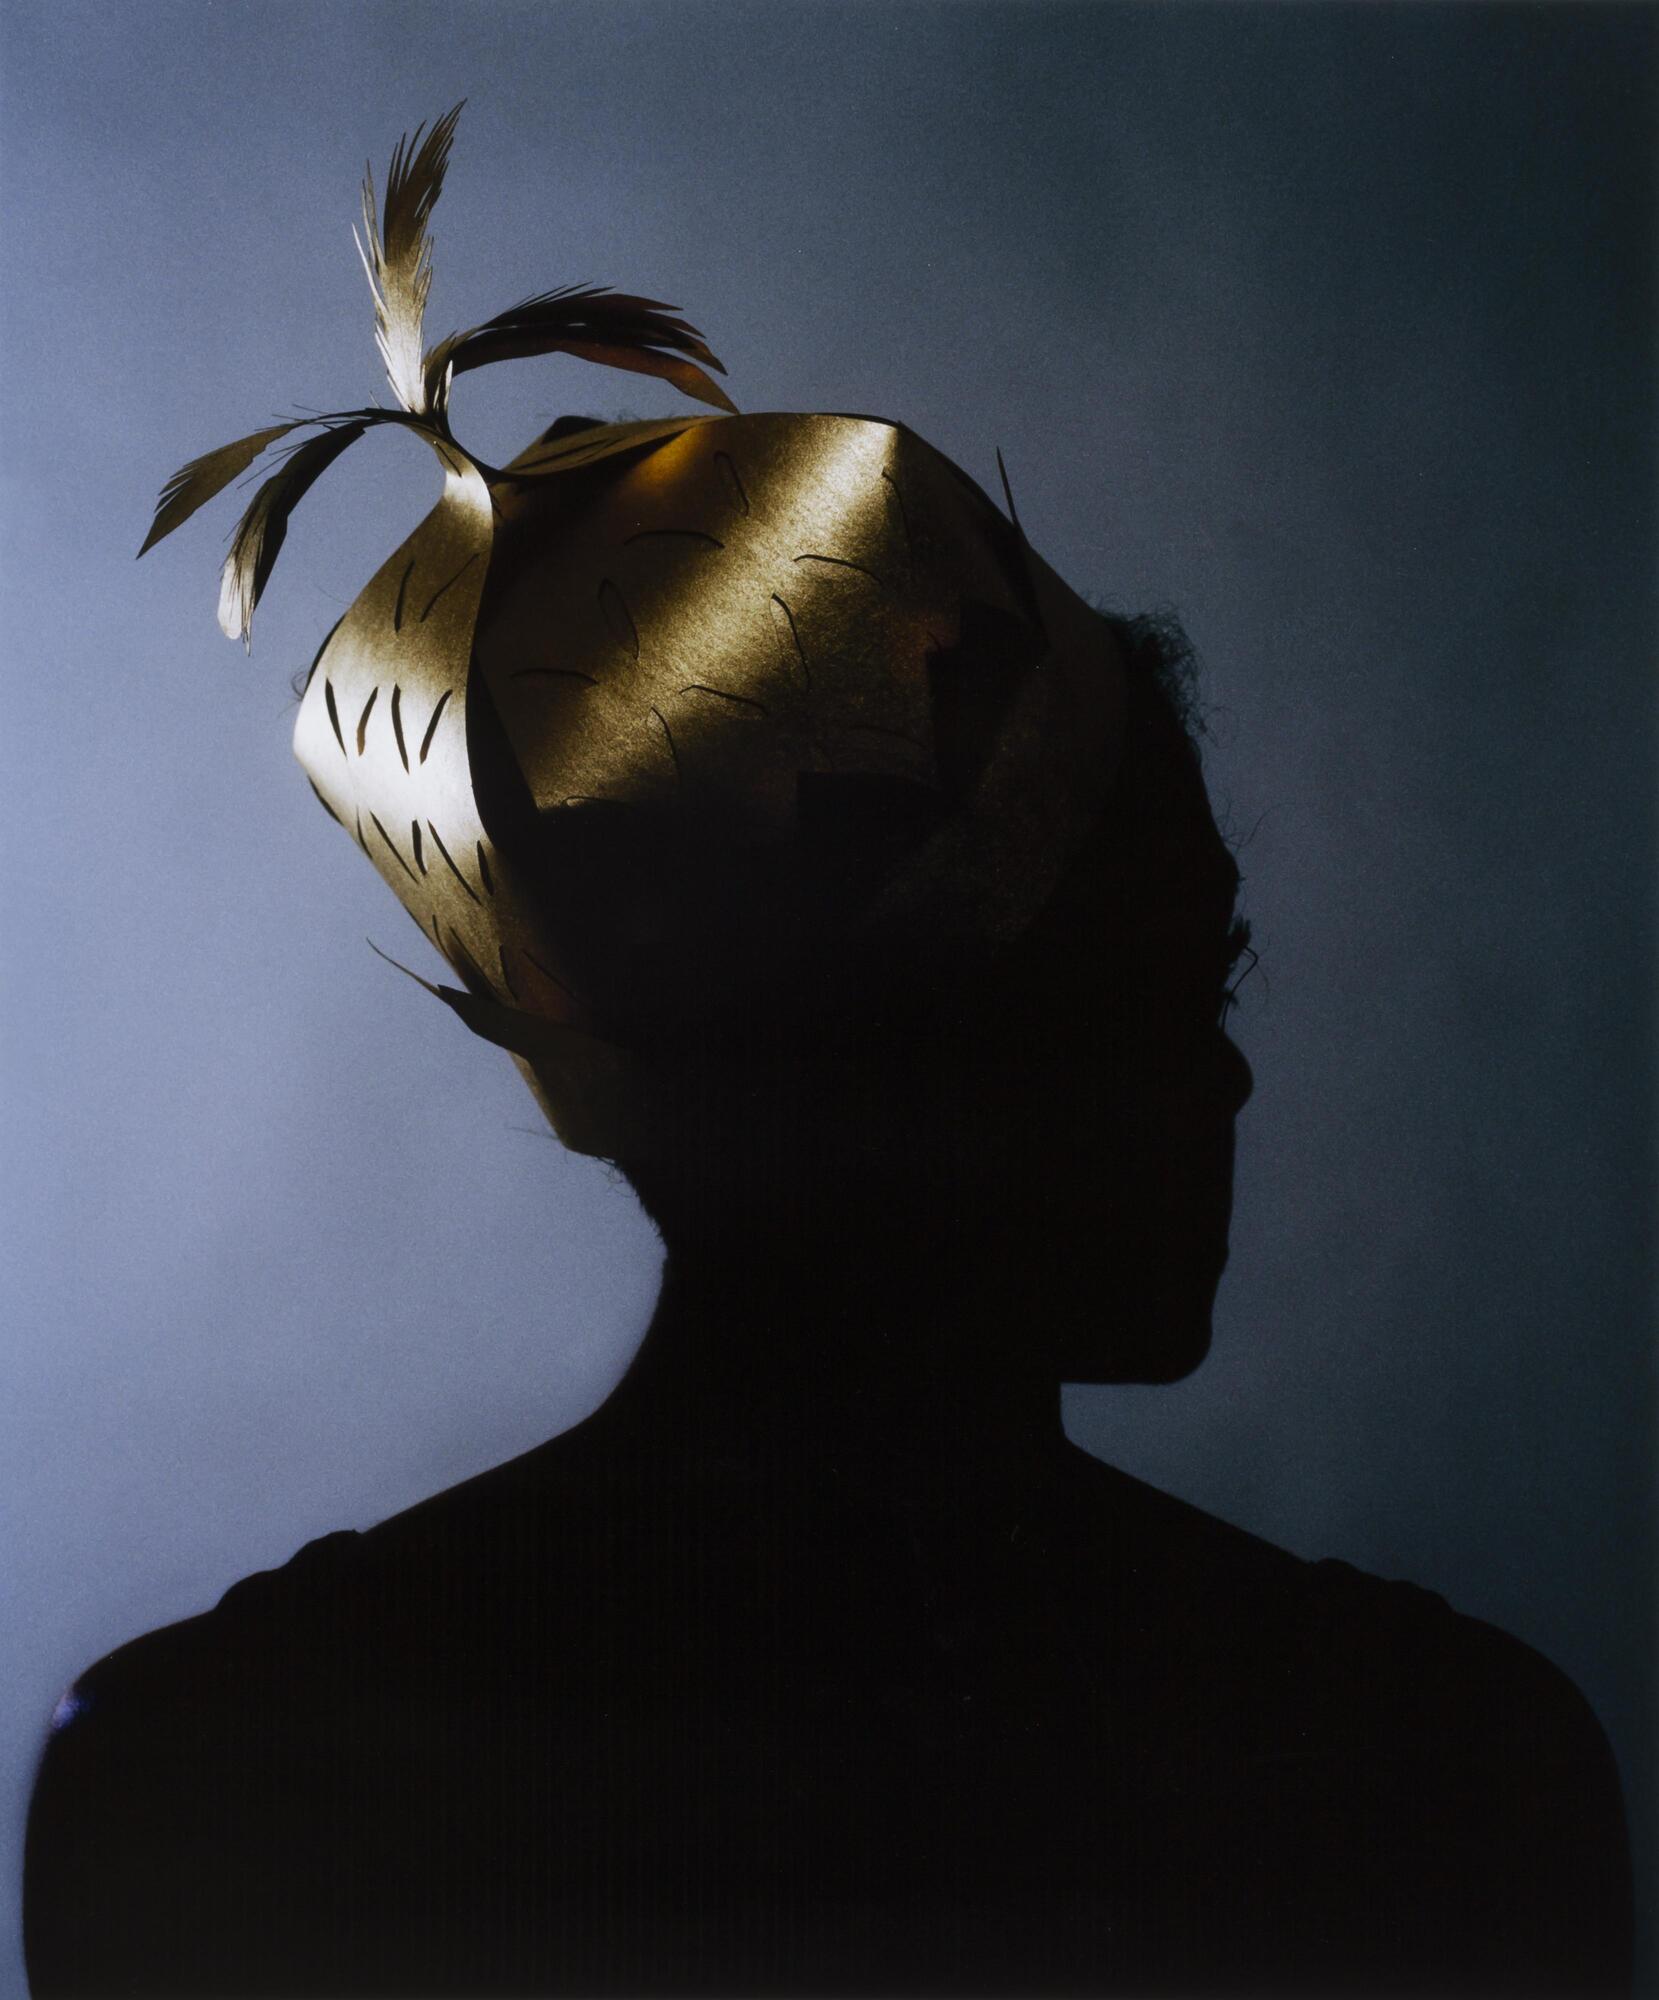 Silhouette of a person facing away from the camera wearing feathered headwear.